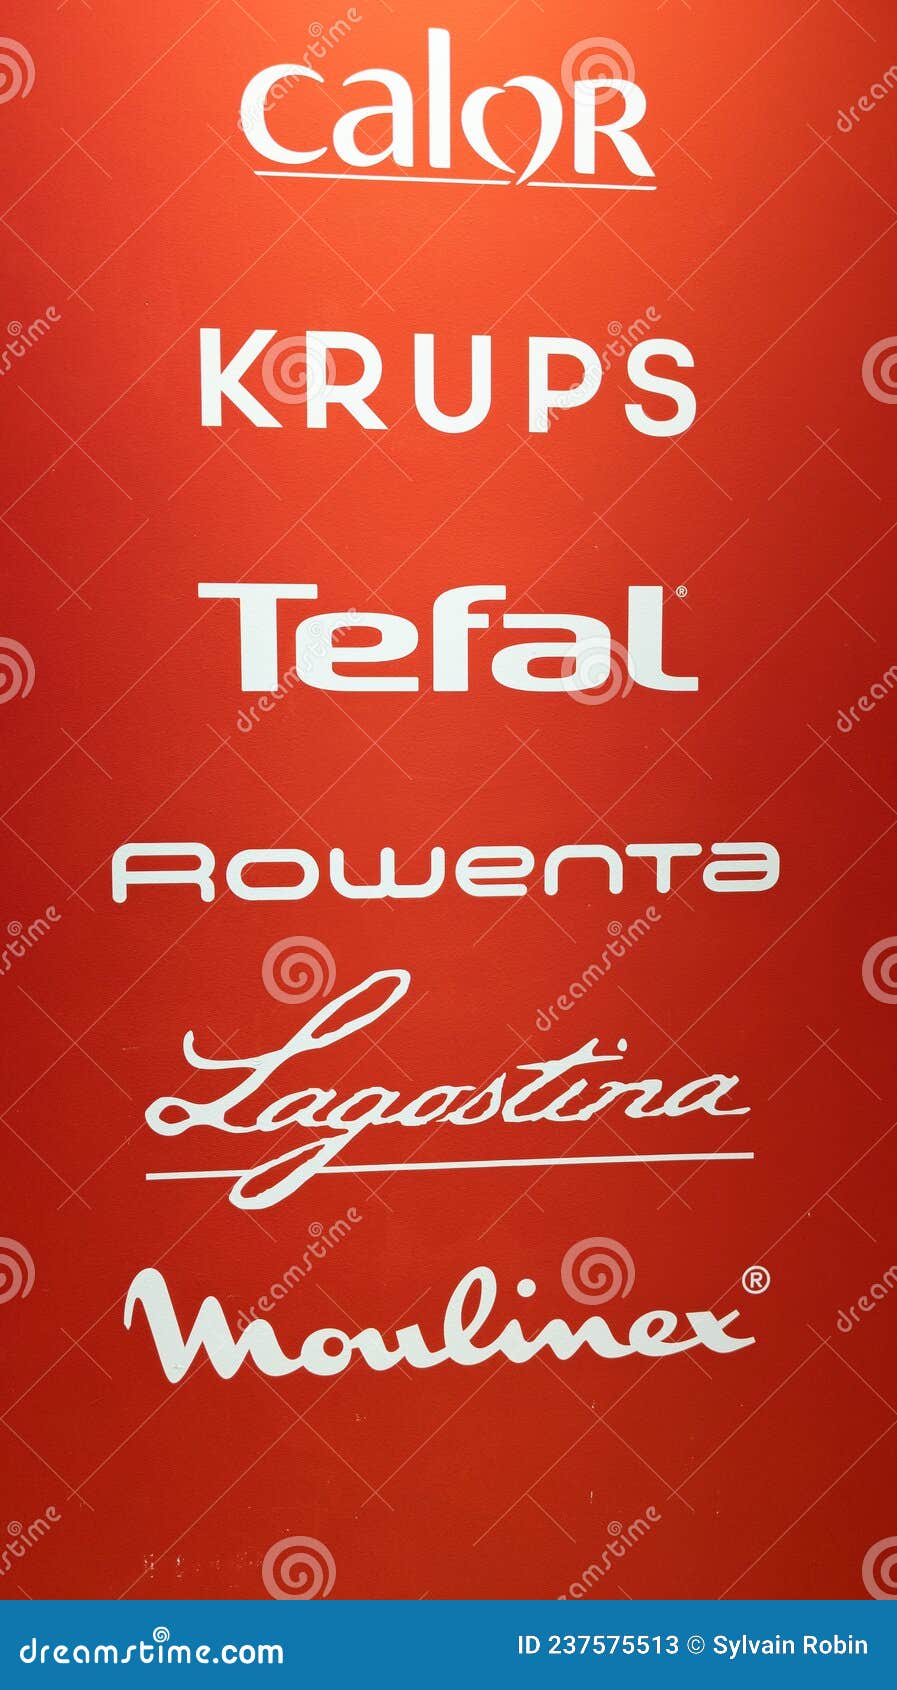 Moulinex Calor Krups Tefal Rowenta Lagostina Brand Sign and Logo Text Front  of Wall Editorial Stock Photo - Image of entrance, industrial: 237575513